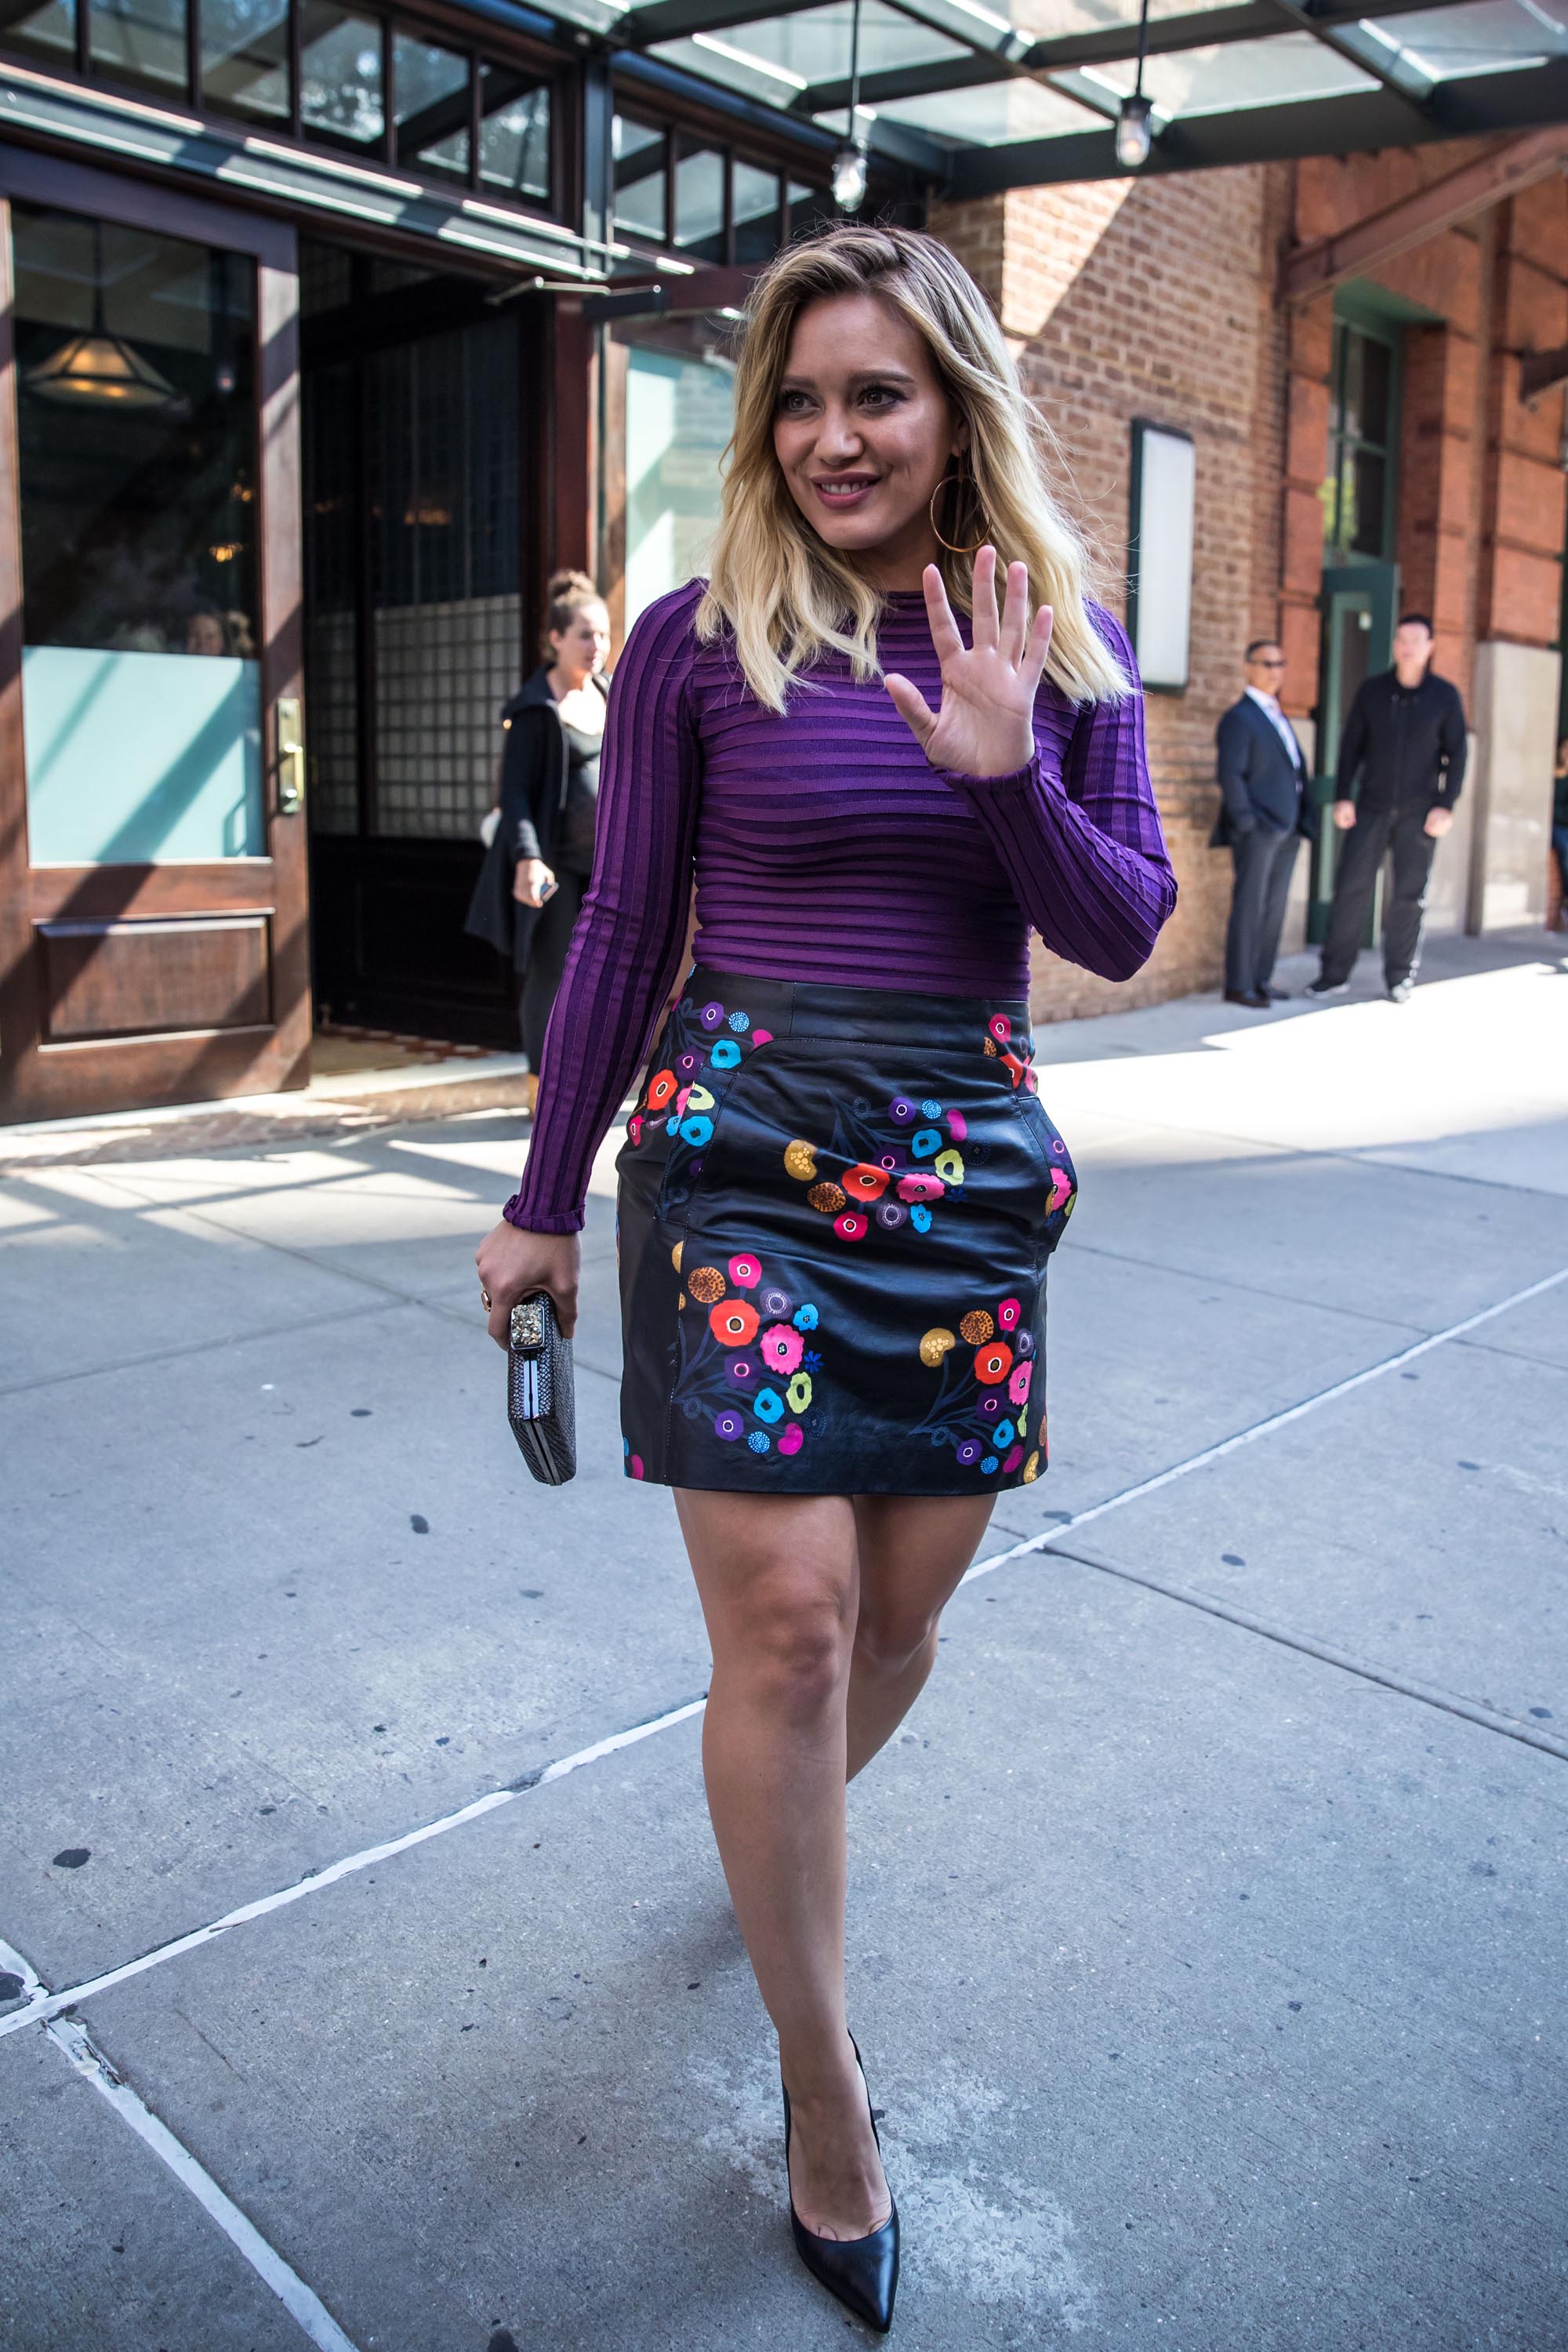 Hilary Duff attends The Build Series Presents The Cast Of Younger